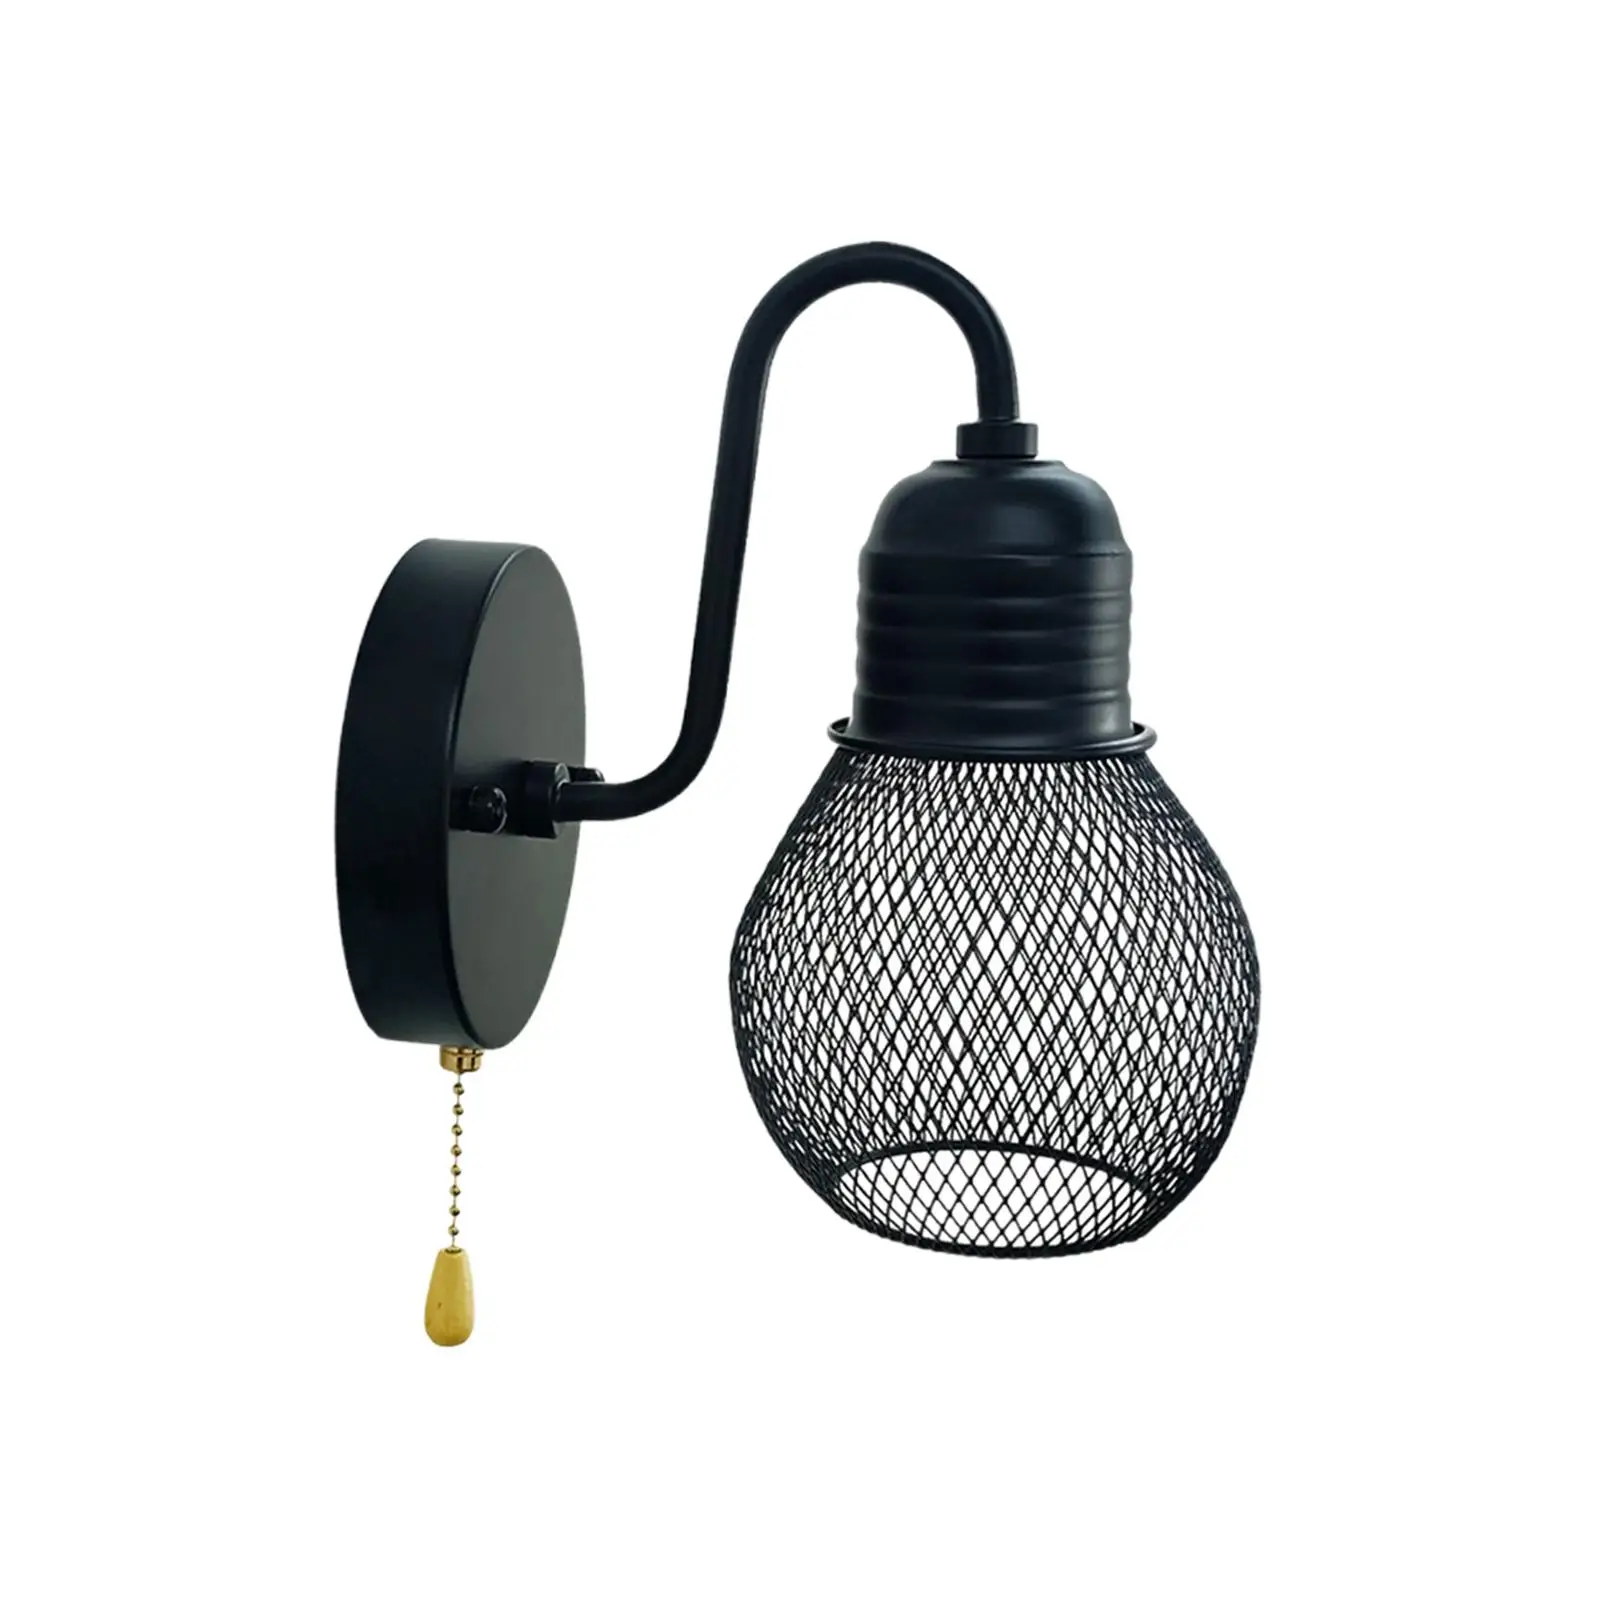 Black Industrial Wall Sconce Farmhouse Wall Light Wall Lamp Retro Style for Bathroom Barn Porch Home Living Room